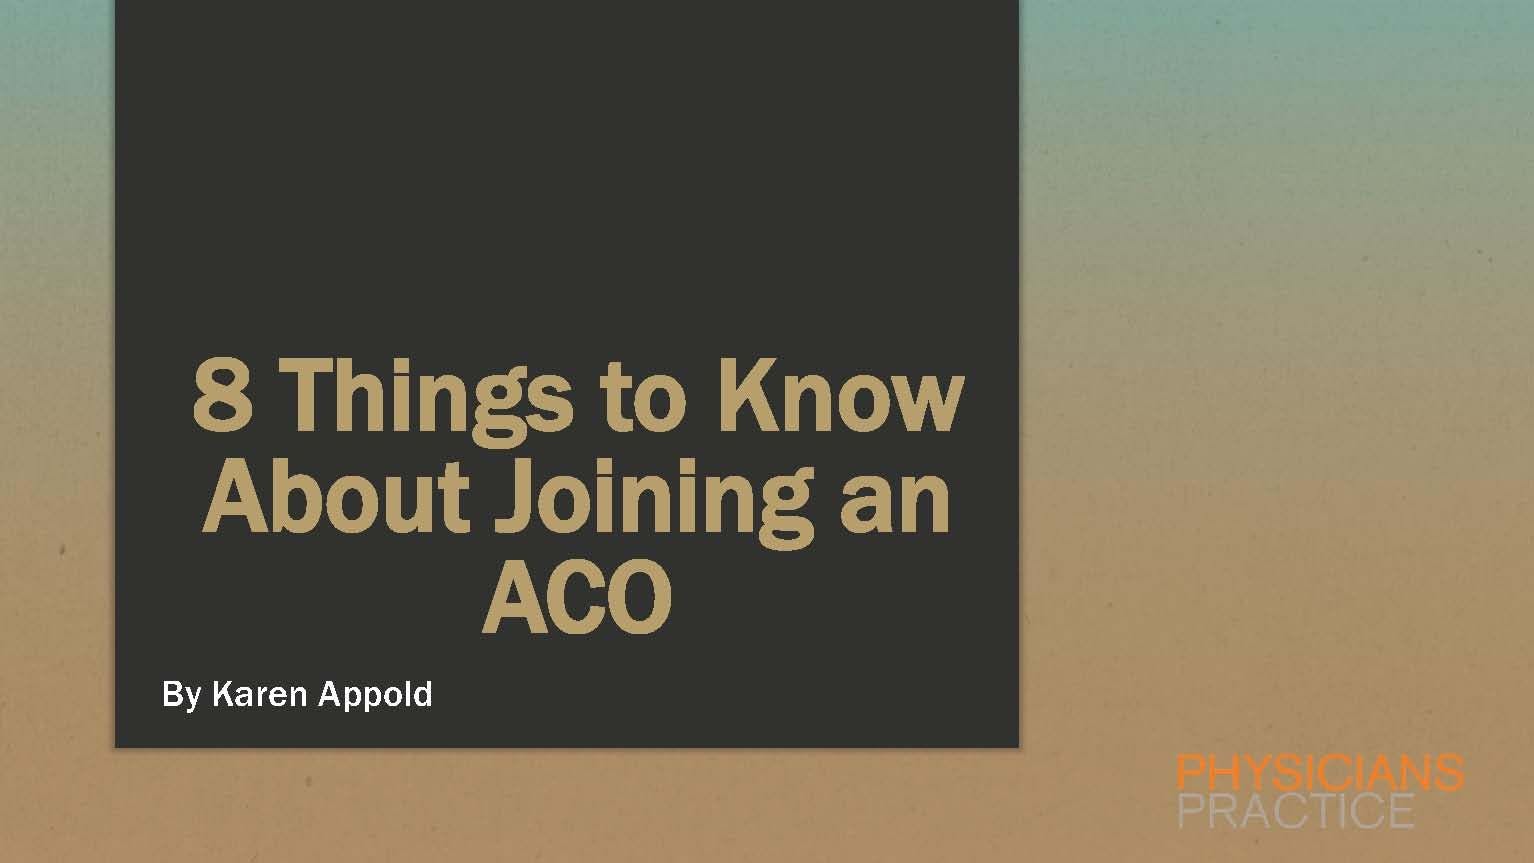 8 Things to Know About Joining an ACO